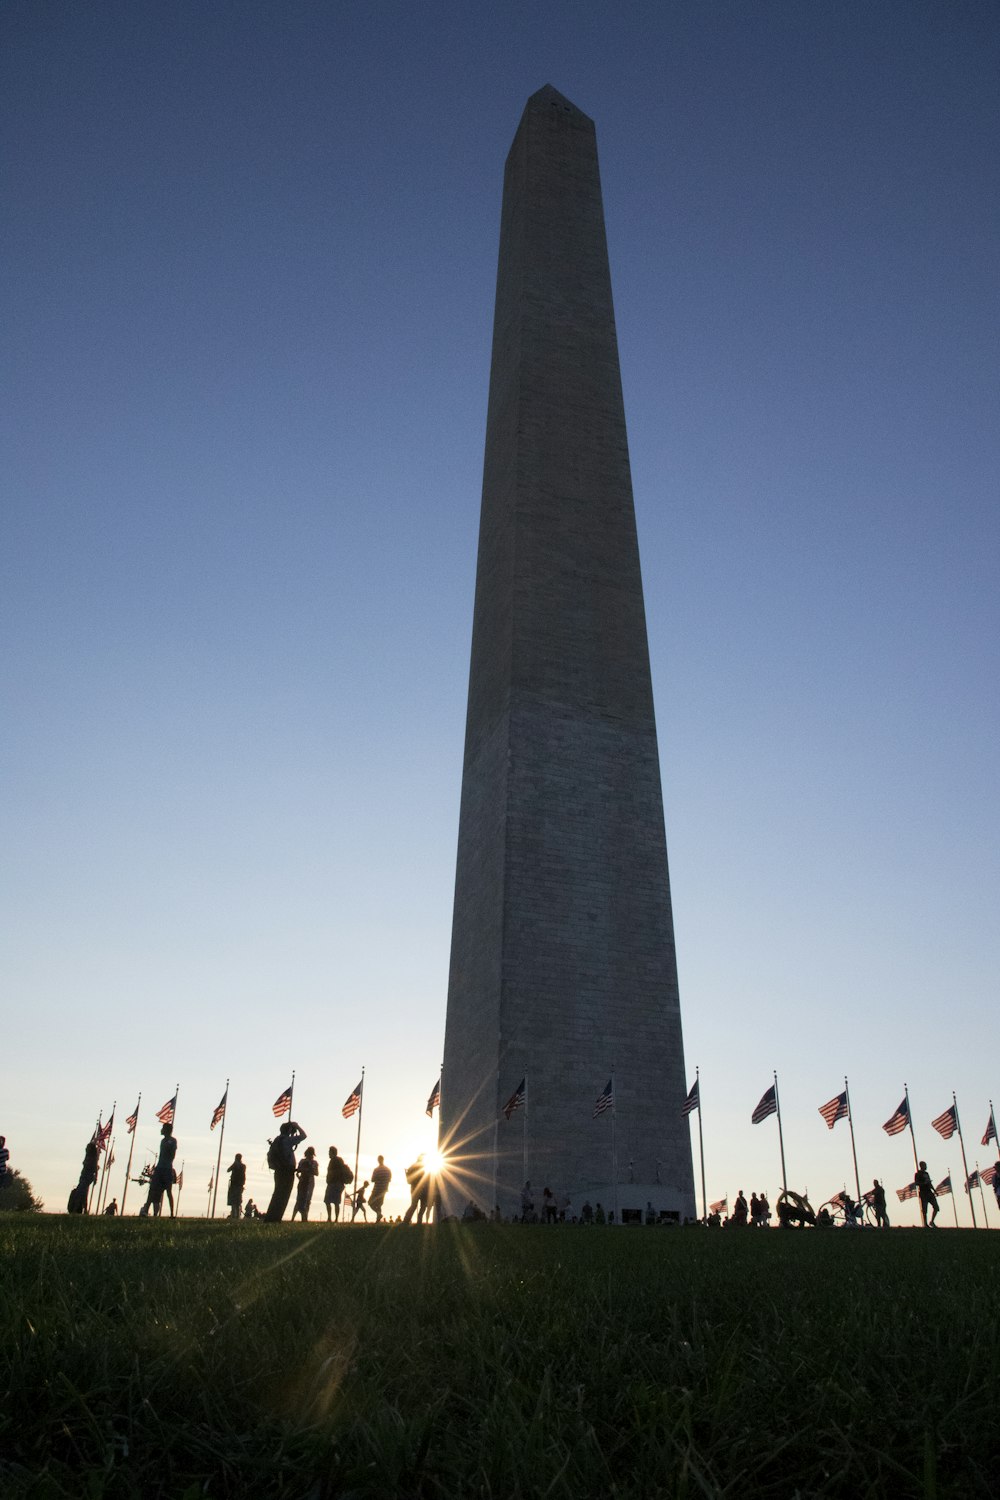 a group of people standing in front of the washington monument